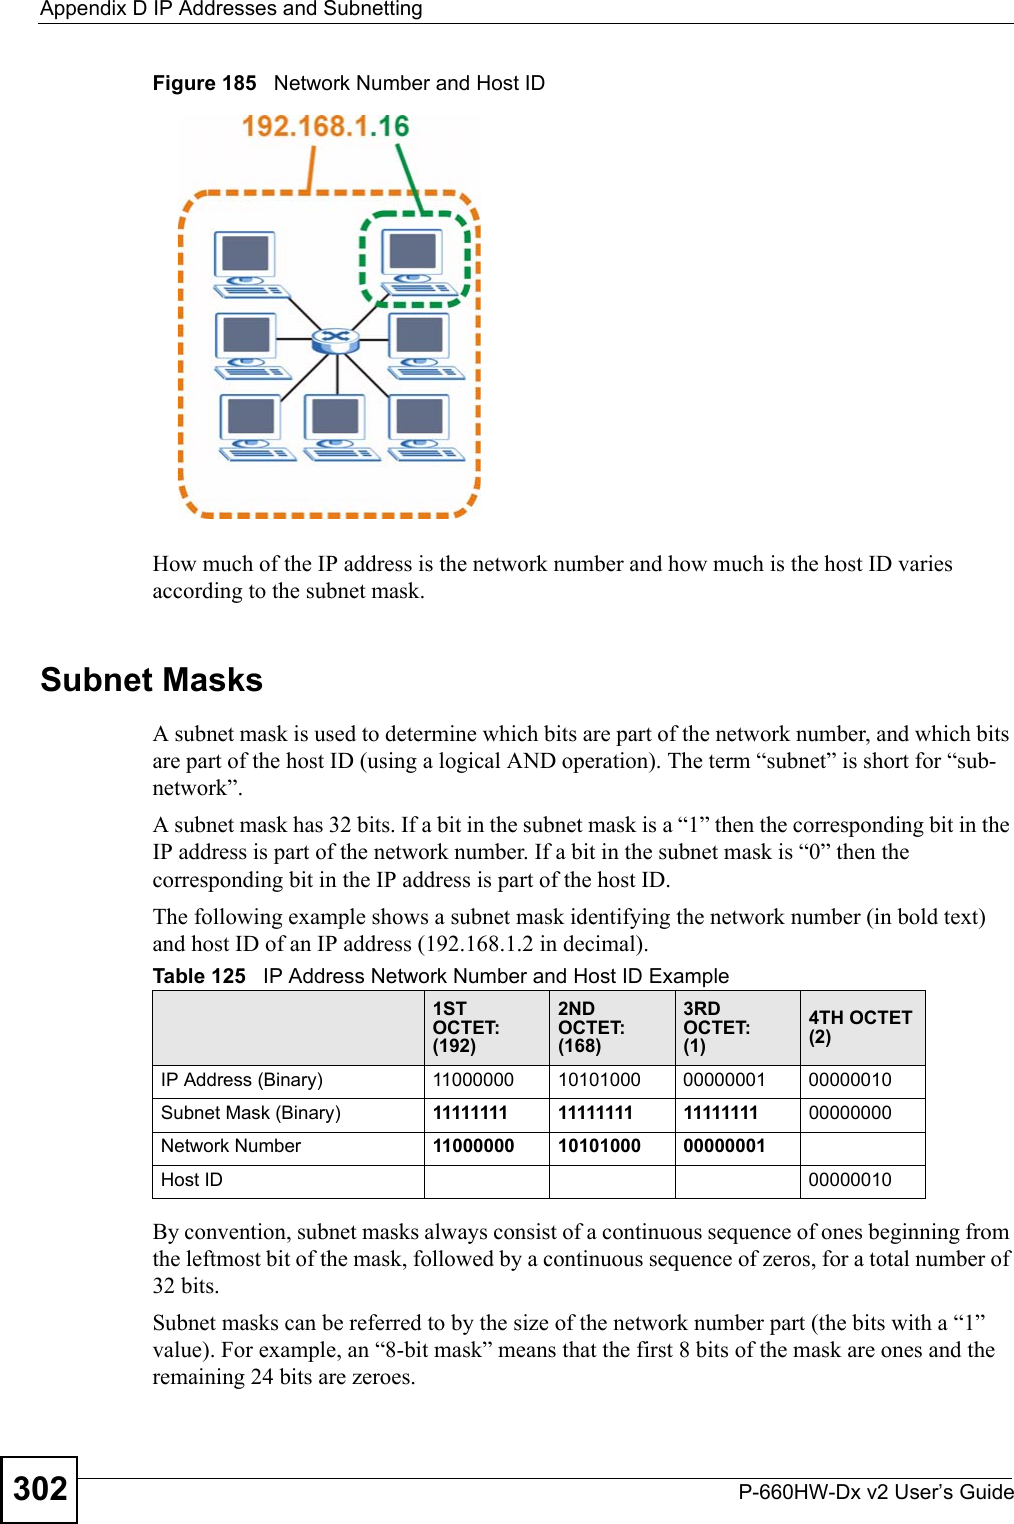 Appendix D IP Addresses and SubnettingP-660HW-Dx v2 User’s Guide302Figure 185   Network Number and Host IDHow much of the IP address is the network number and how much is the host ID varies according to the subnet mask.  Subnet MasksA subnet mask is used to determine which bits are part of the network number, and which bits are part of the host ID (using a logical AND operation). The term “subnet” is short for “sub-network”.A subnet mask has 32 bits. If a bit in the subnet mask is a “1” then the corresponding bit in the IP address is part of the network number. If a bit in the subnet mask is “0” then the corresponding bit in the IP address is part of the host ID. The following example shows a subnet mask identifying the network number (in bold text) and host ID of an IP address (192.168.1.2 in decimal).By convention, subnet masks always consist of a continuous sequence of ones beginning from the leftmost bit of the mask, followed by a continuous sequence of zeros, for a total number of 32 bits.Subnet masks can be referred to by the size of the network number part (the bits with a “1” value). For example, an “8-bit mask” means that the first 8 bits of the mask are ones and the remaining 24 bits are zeroes.Table 125   IP Address Network Number and Host ID Example1ST OCTET:(192)2ND OCTET:(168)3RD OCTET:(1)4TH OCTET(2)IP Address (Binary) 11000000 10101000 00000001 00000010Subnet Mask (Binary) 11111111 11111111 11111111 00000000Network Number 11000000 10101000 00000001Host ID 00000010